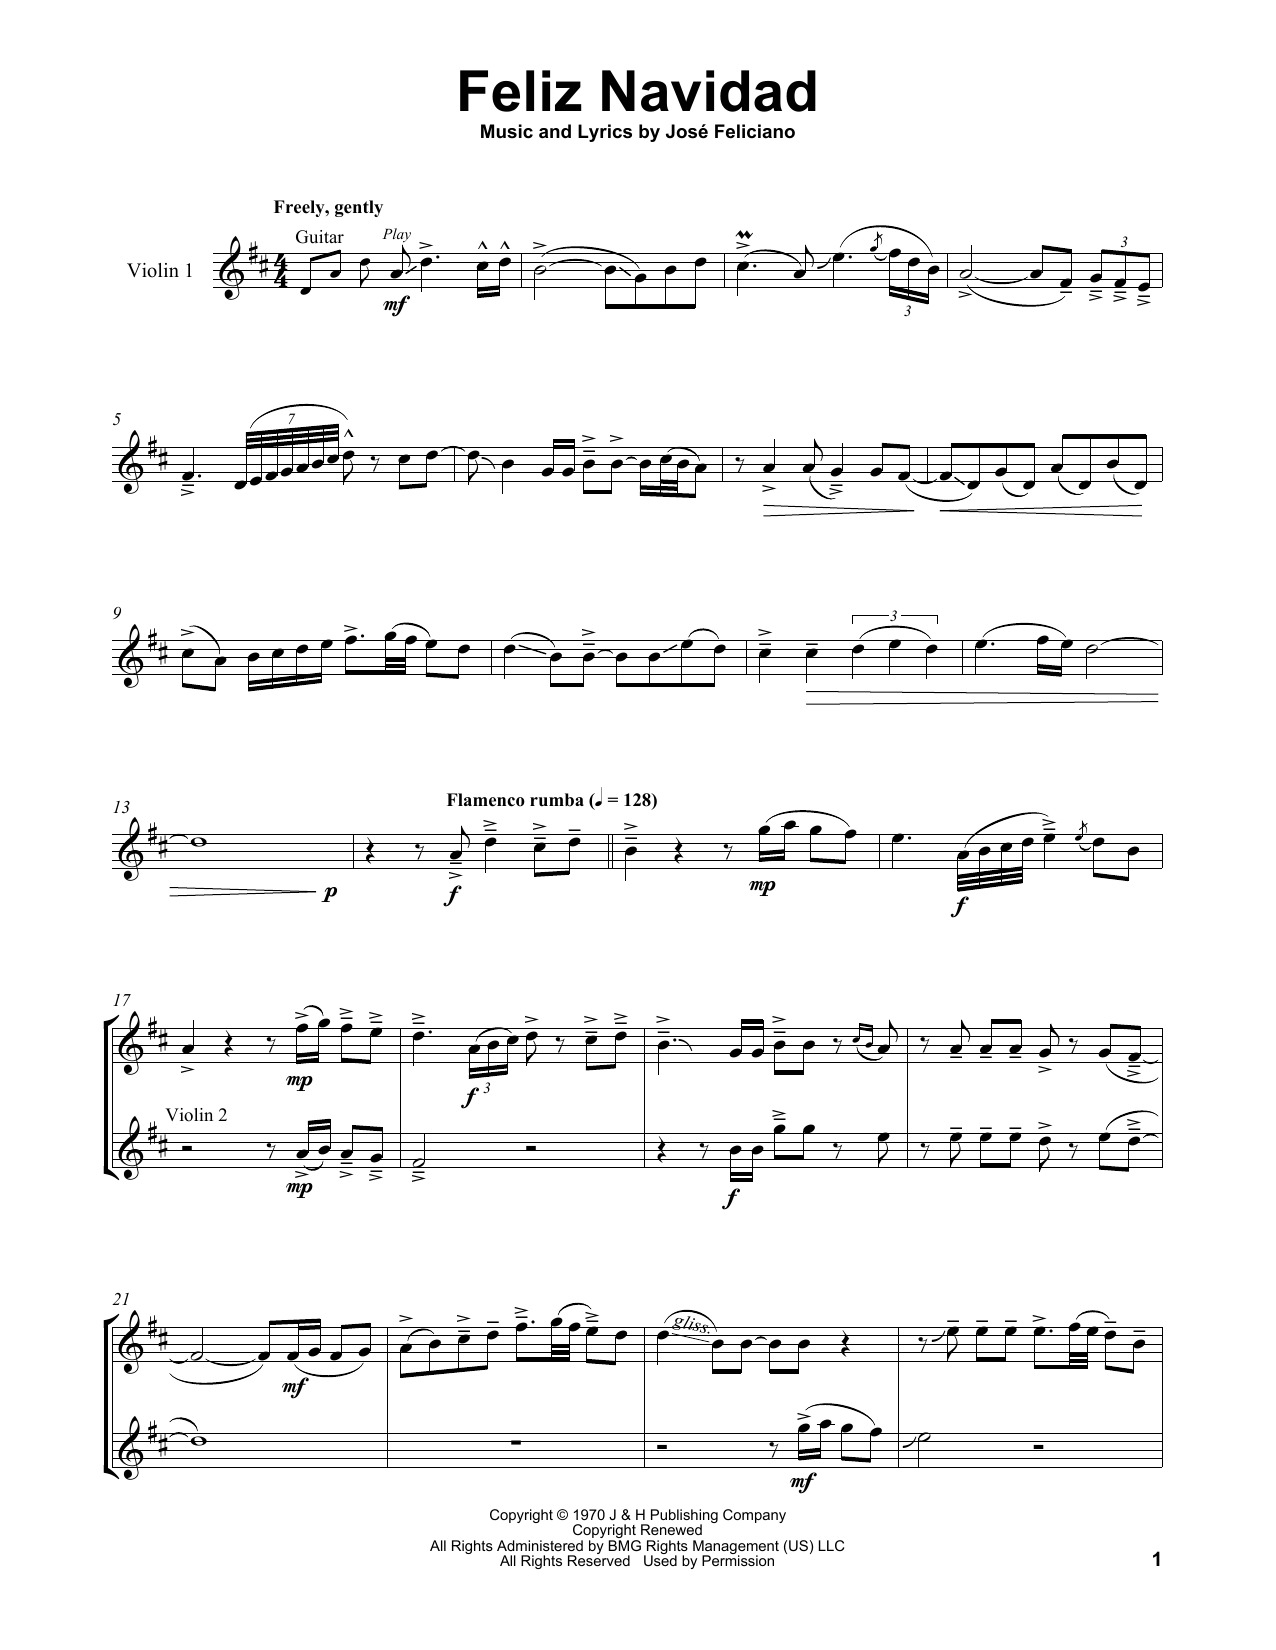 Green Hill Zone Sheet Music - 17 Arrangements Available Instantly -  Musicnotes